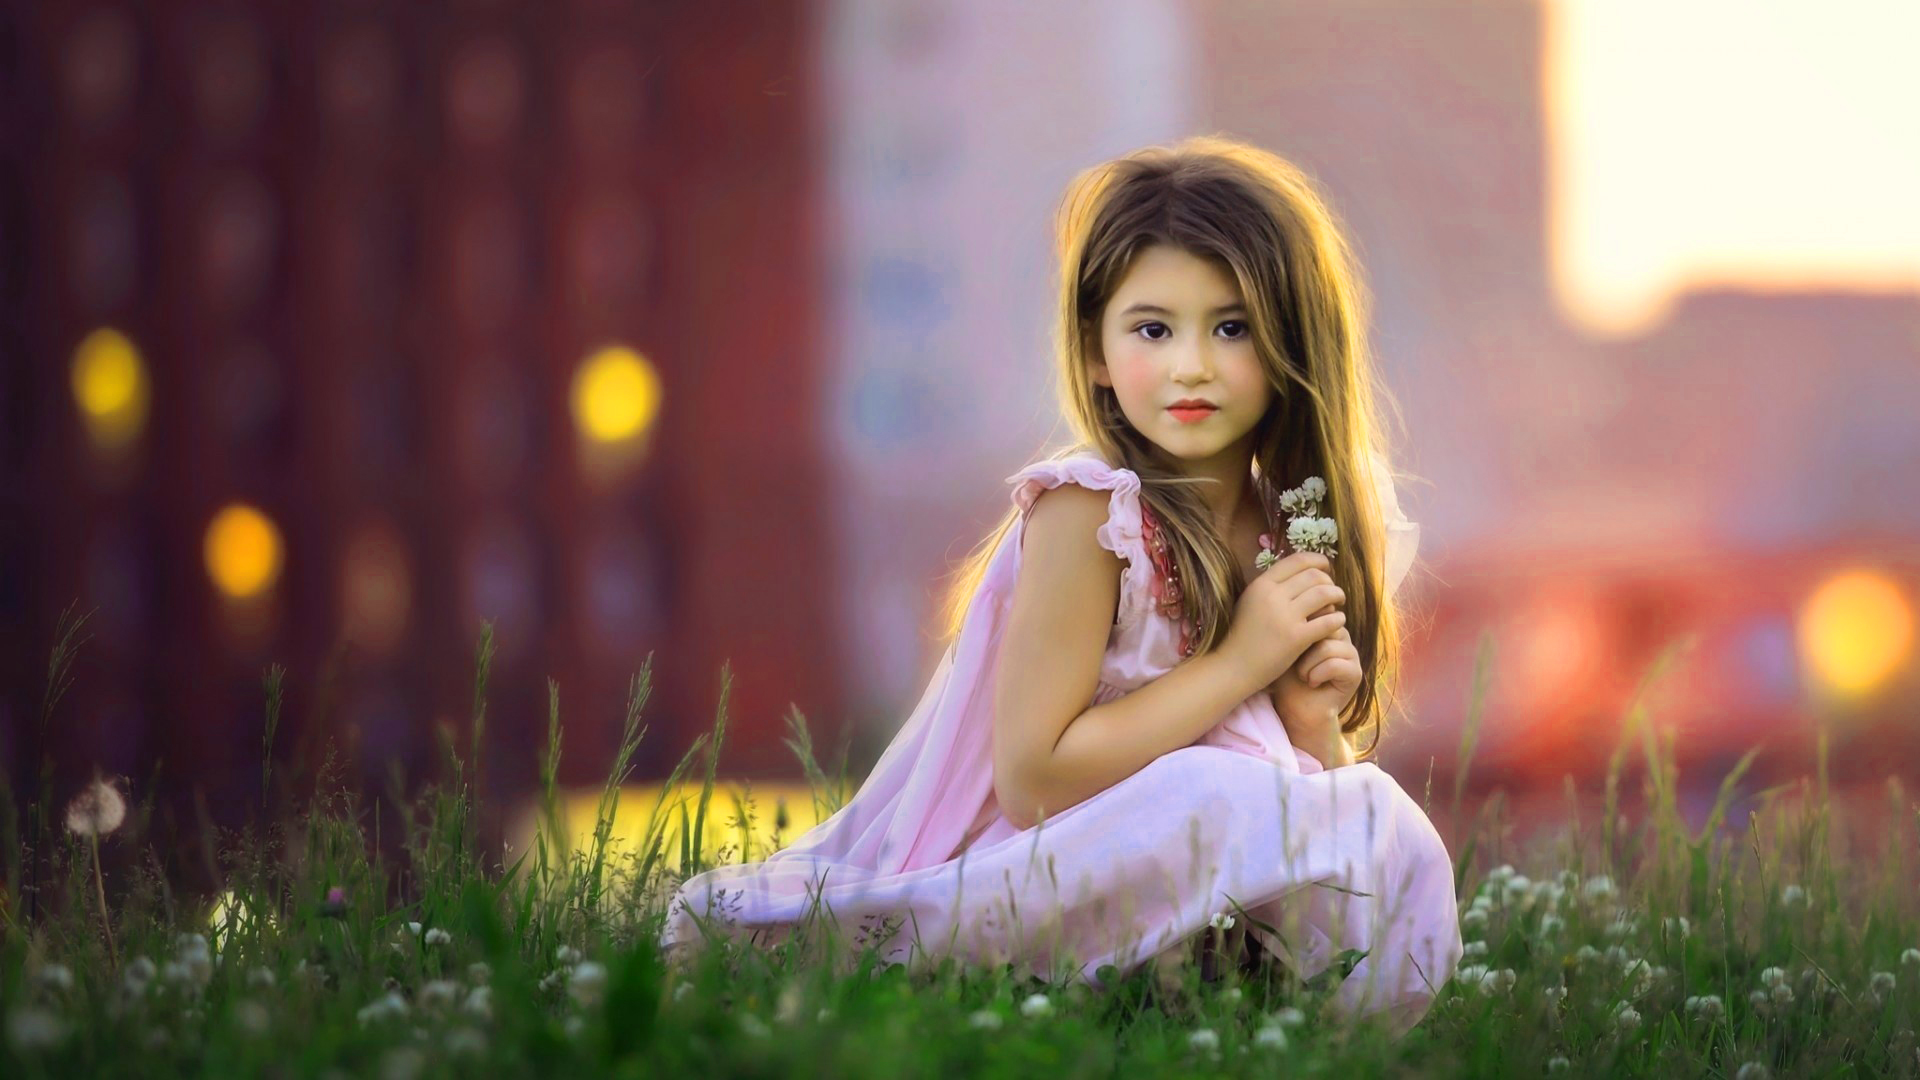 indian girl hd wallpaper,people in nature,beauty,yellow,grass,photography